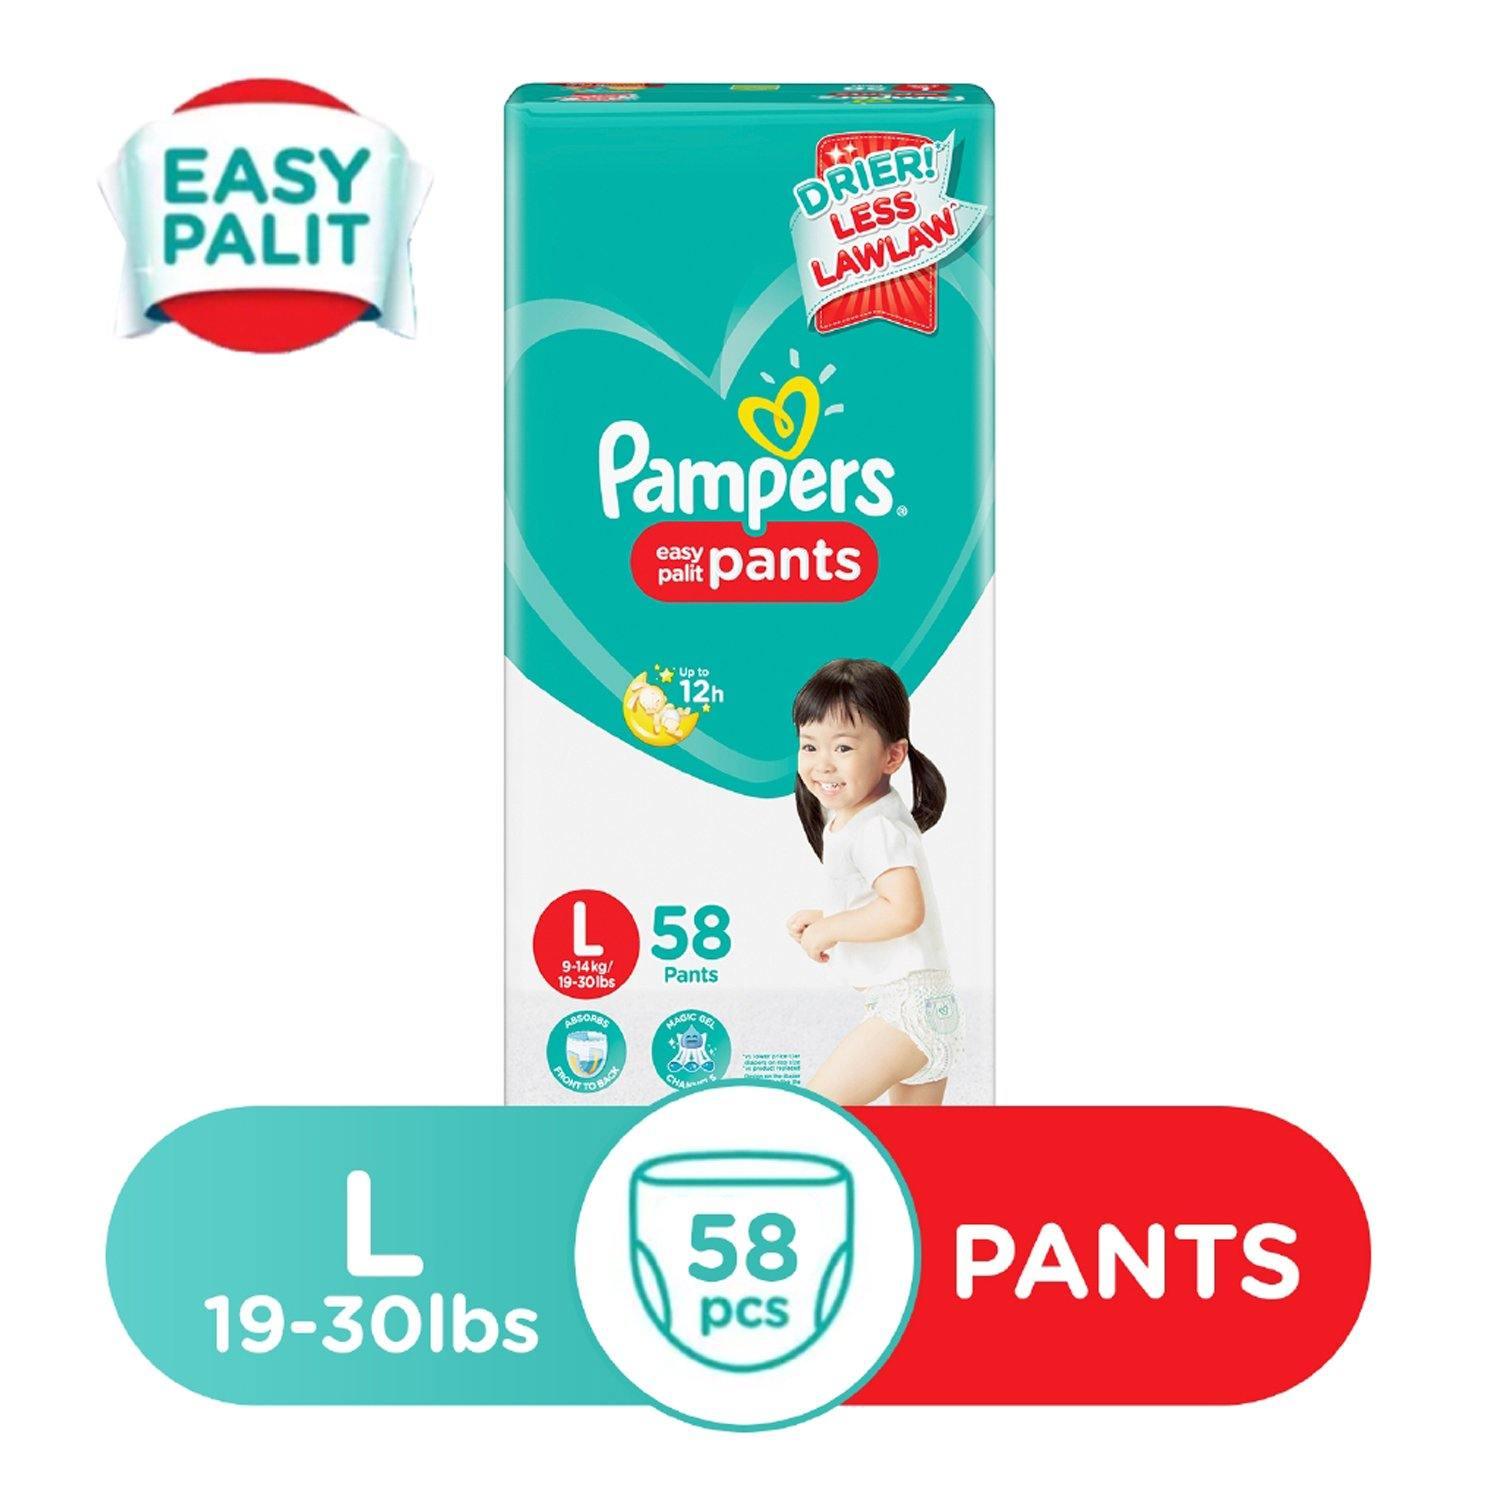 Nonwoven Pant Diapers Large Size Pampers Diaper Pants, Age Group: 3-12  Months, Packaging Size: 64 Pieces